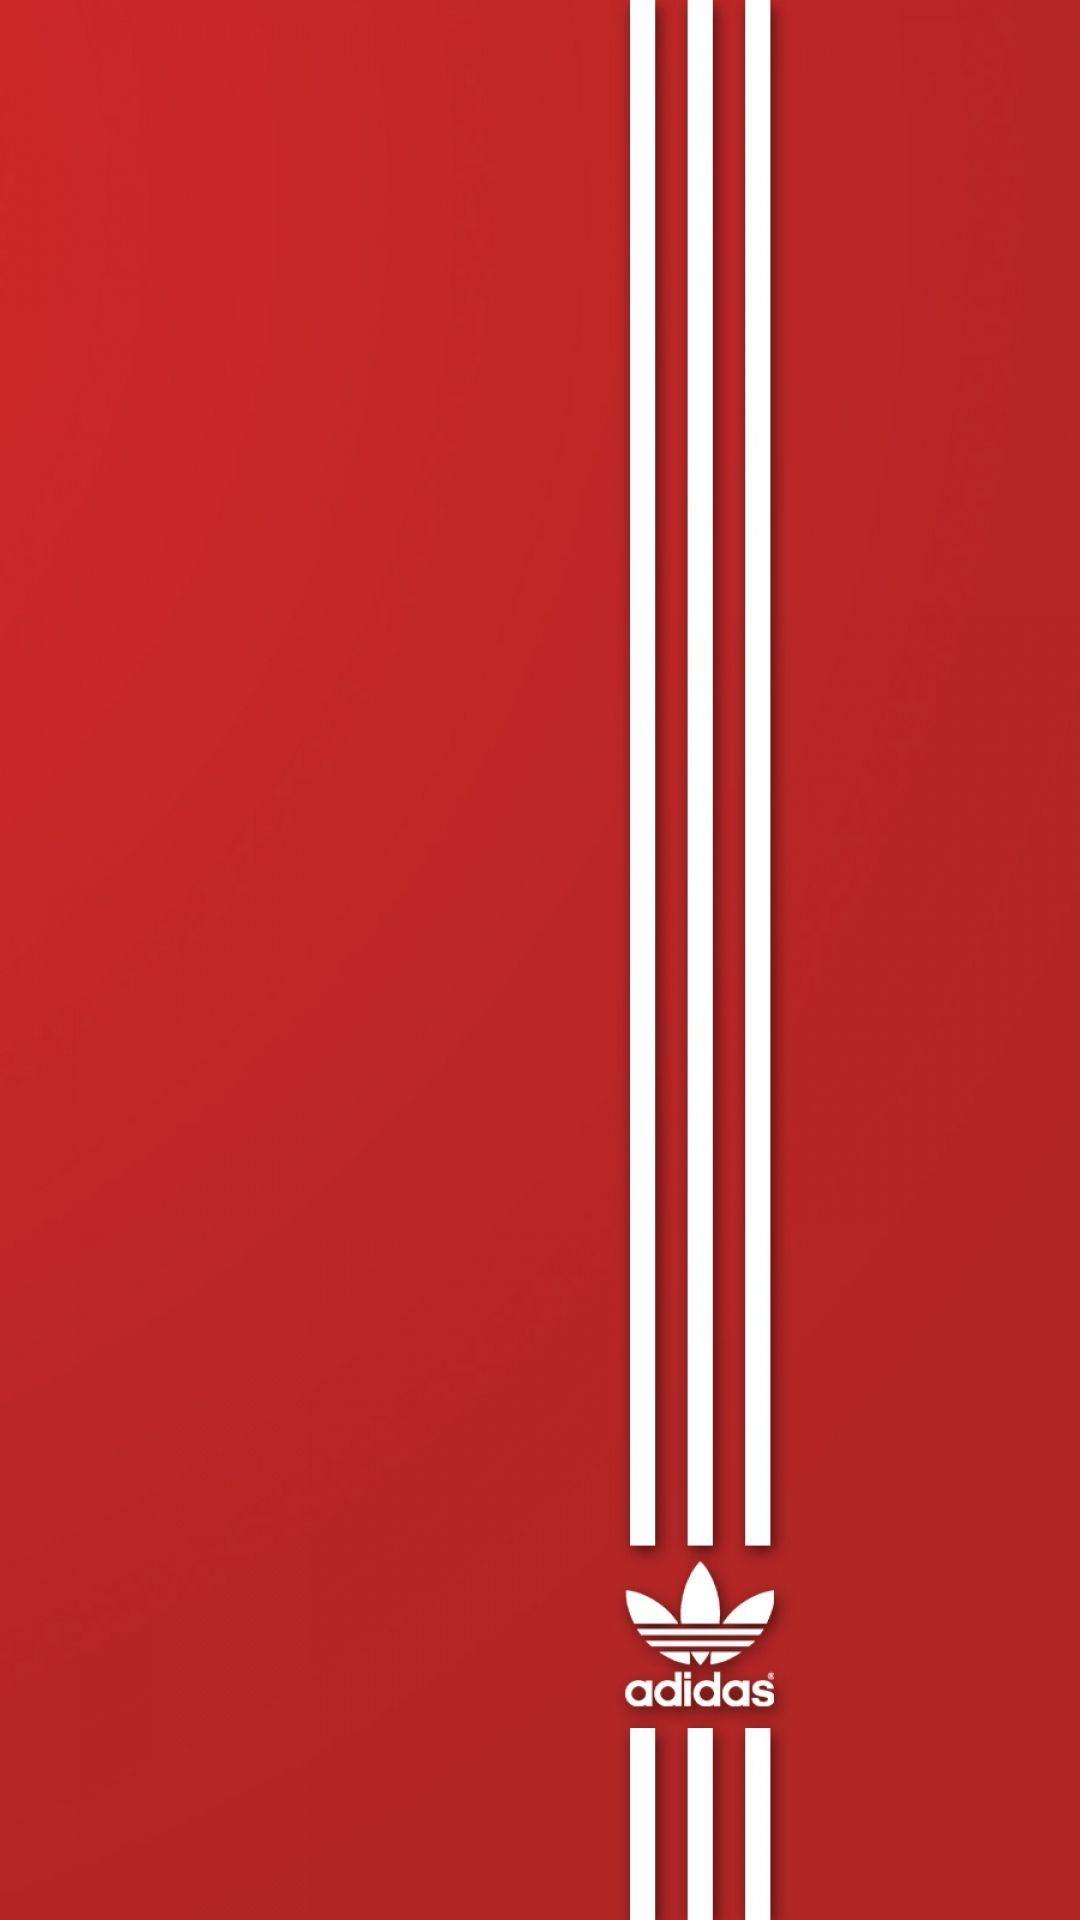 Wallpaper.wiki Red Adidas IPhone Wallpaper PIC WPC0014235